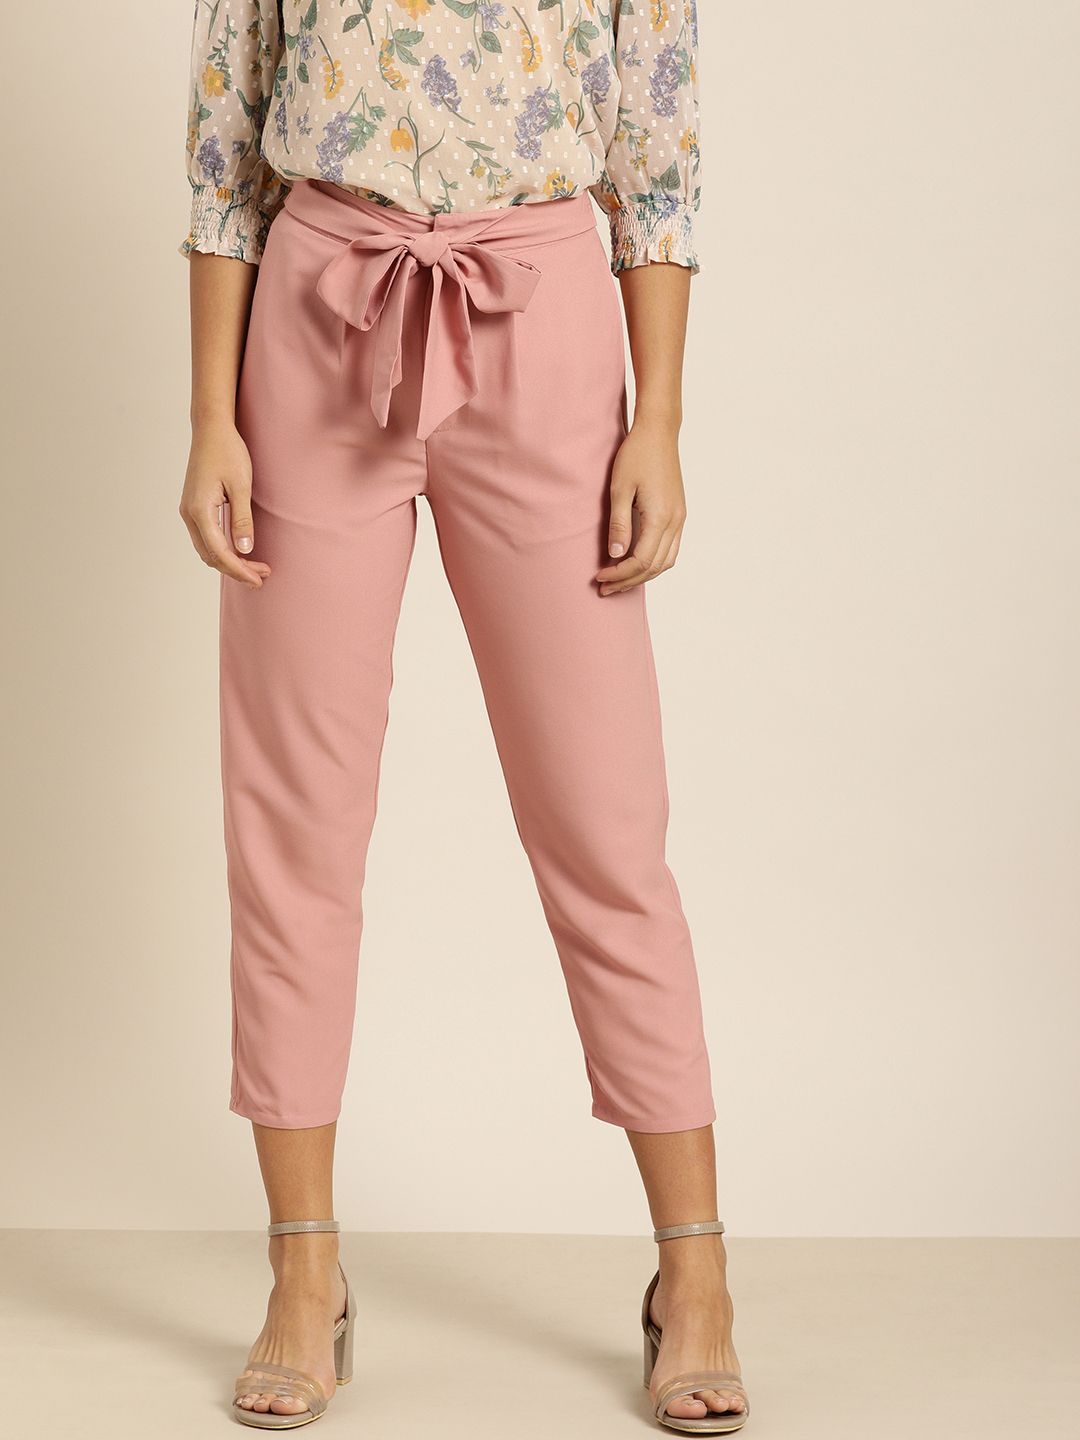 all about you Women Pink Solid Cropped Regular Trousers with Waist Tie-Up detail Price in India